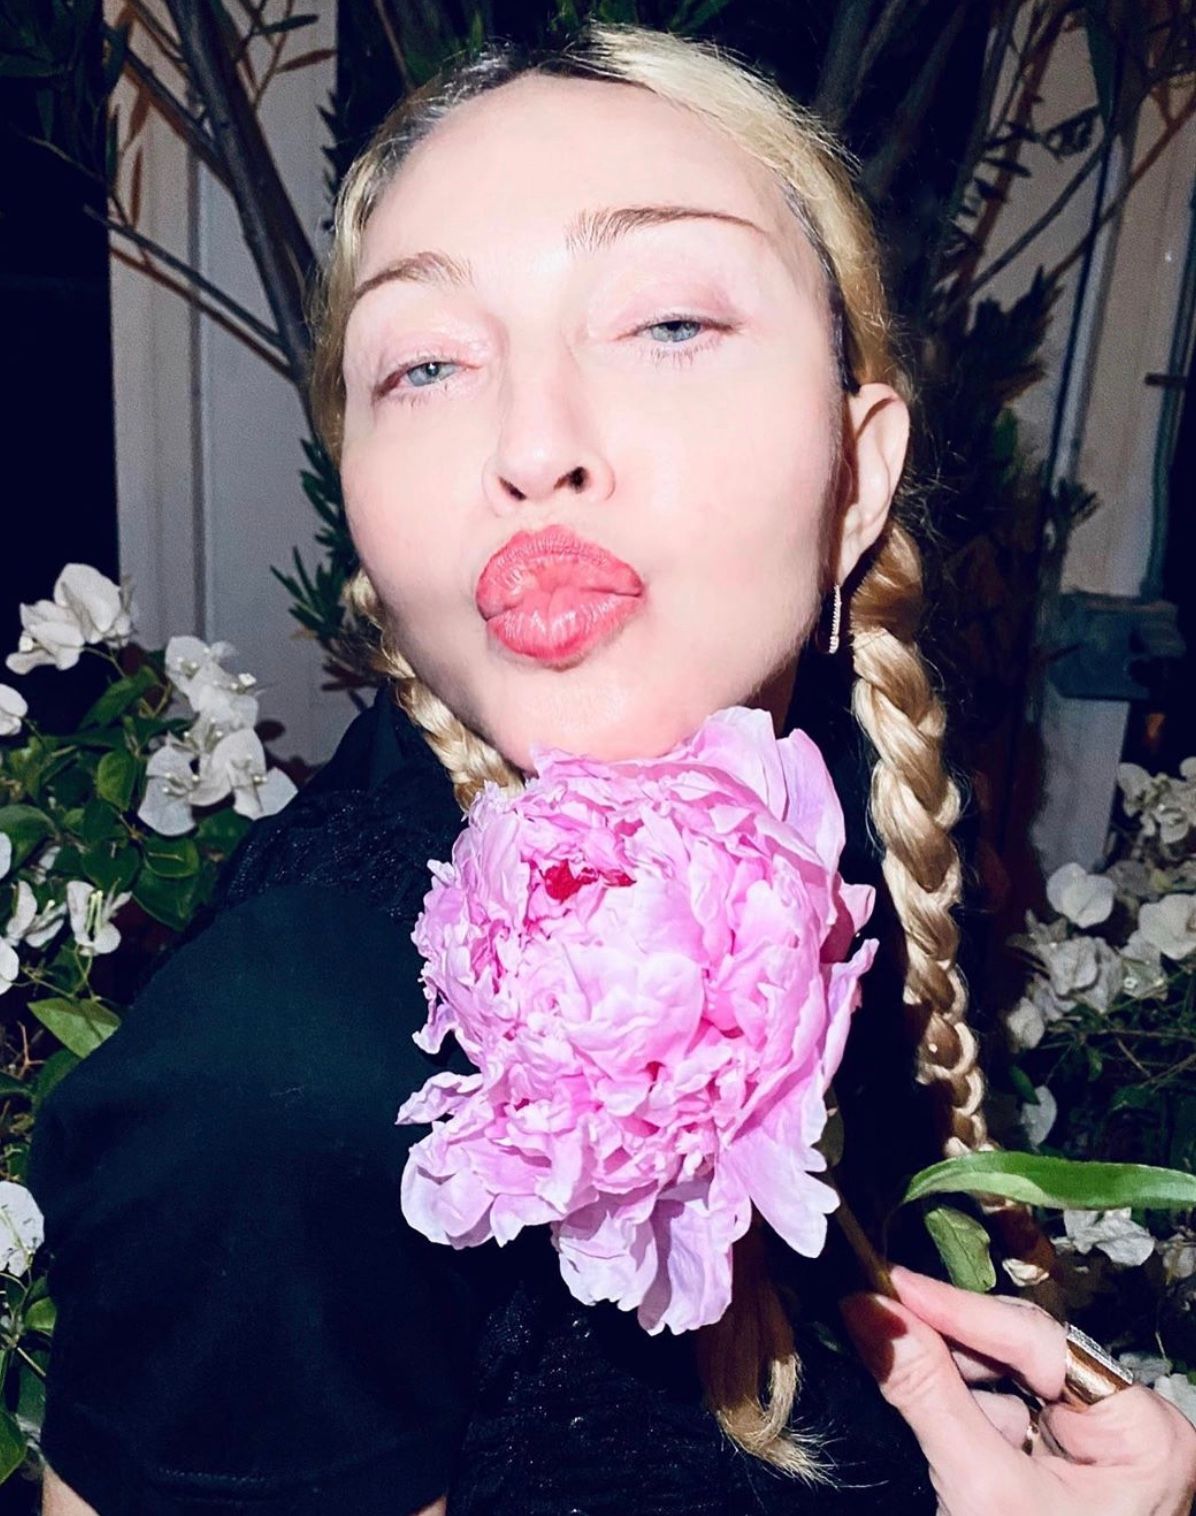 Madonna holds a flower and blows a kiss to the camera